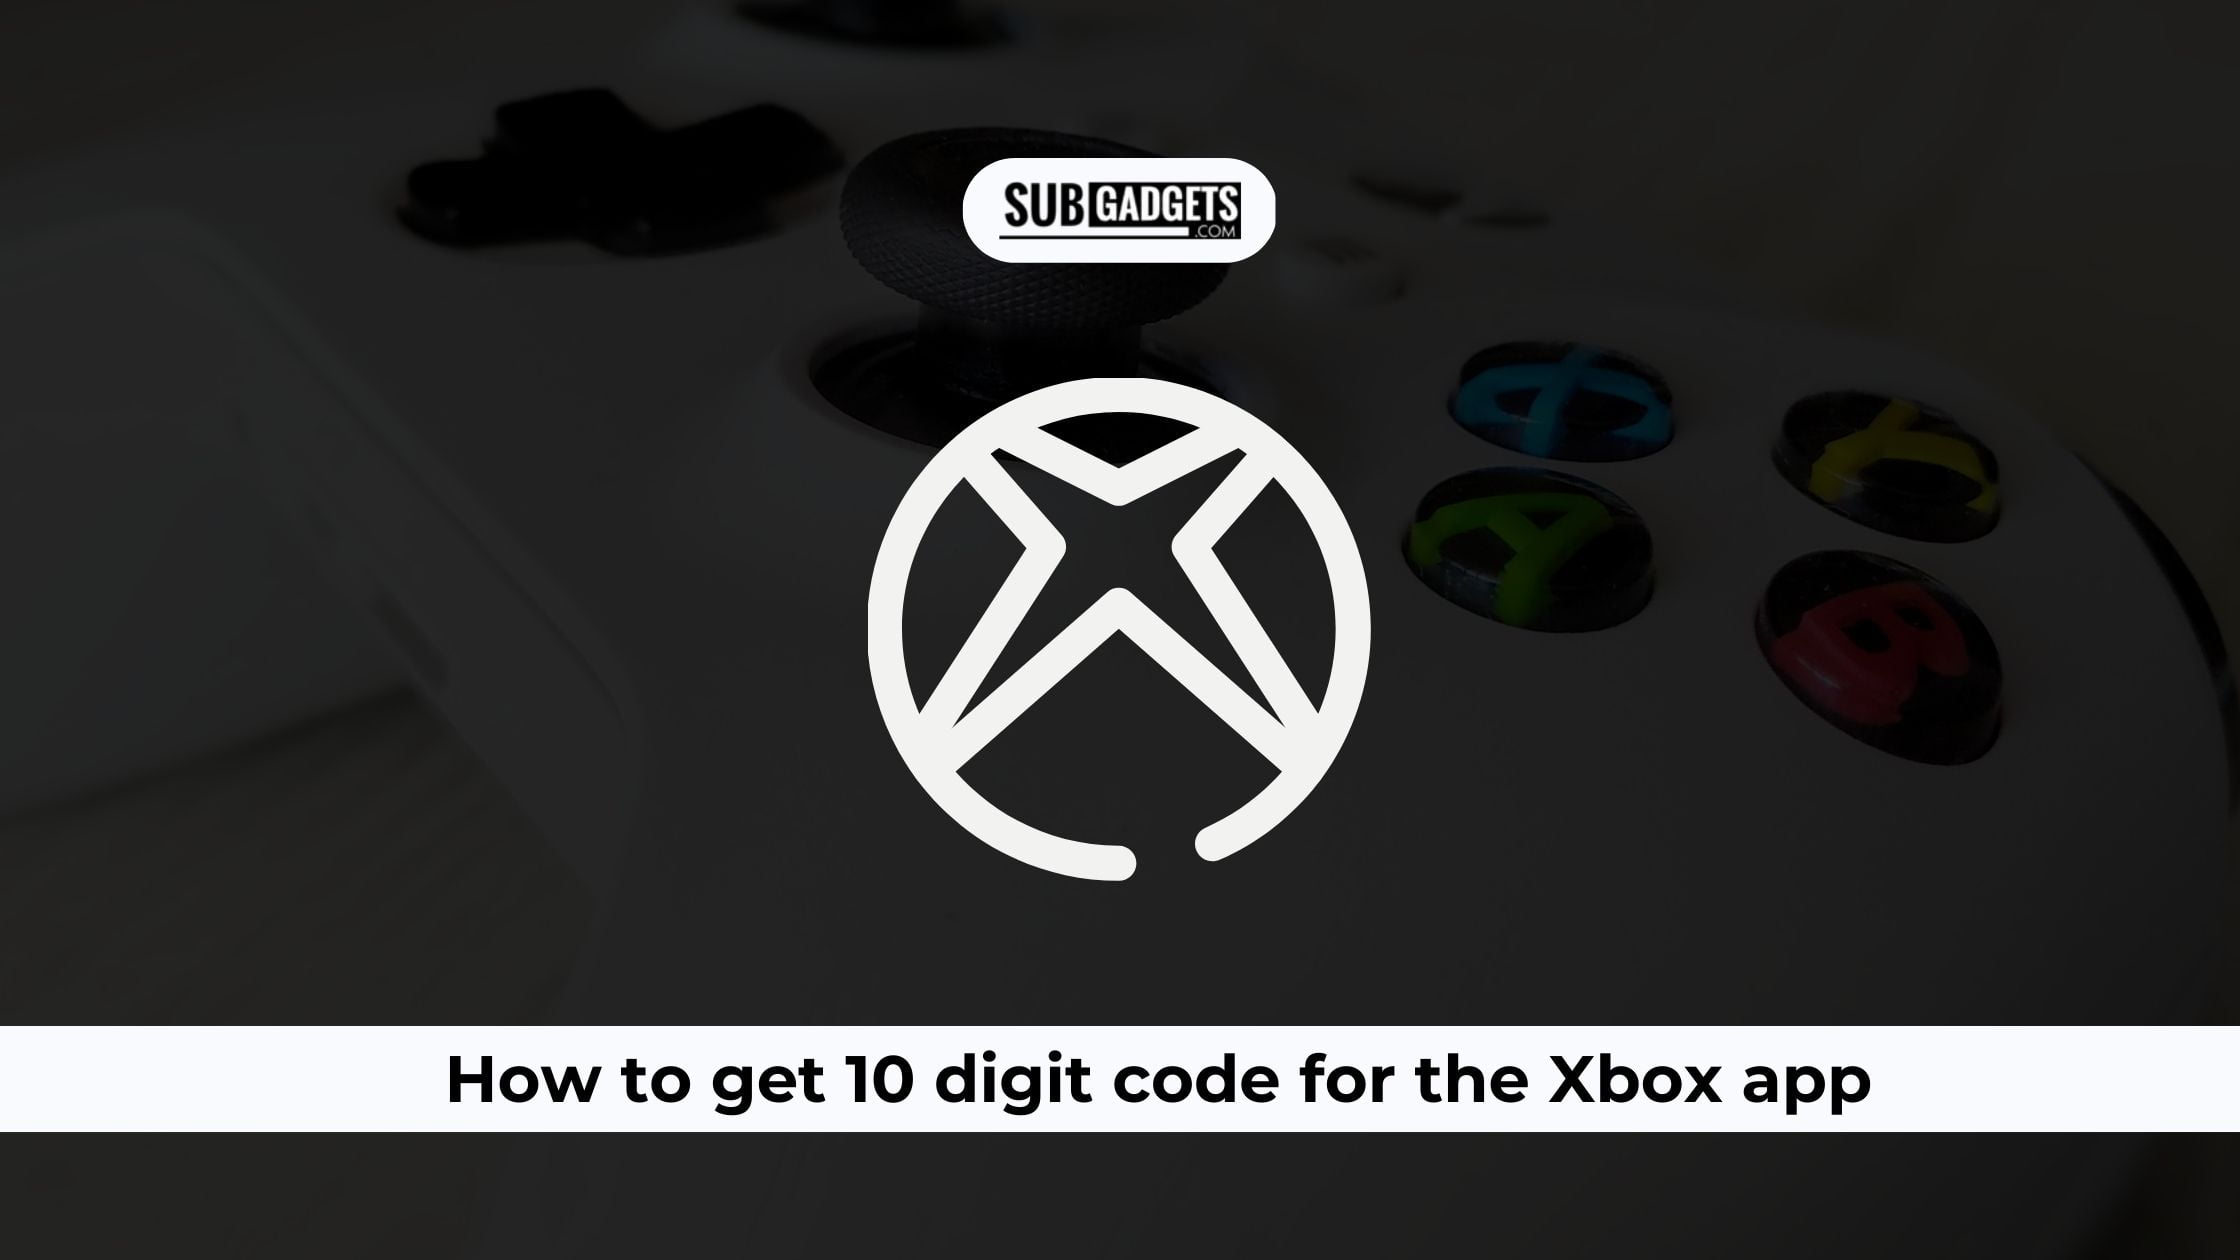 How to get 10 digit code for the Xbox app